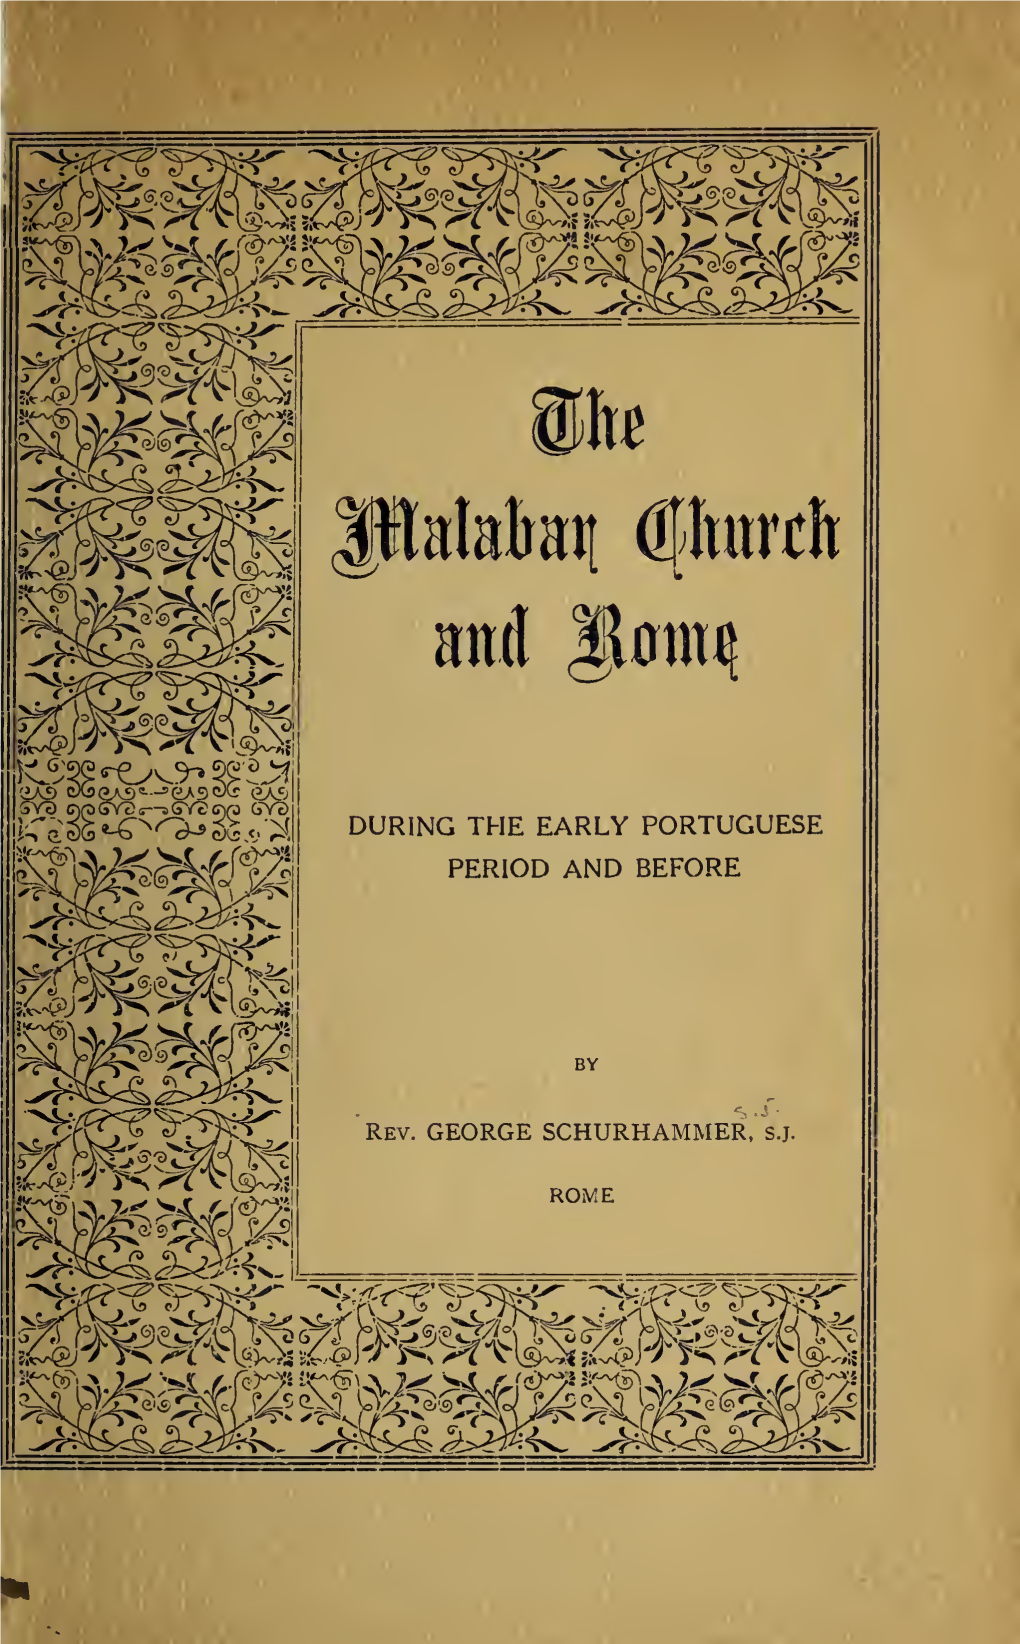 The Malabar Church and Rome During the Early Portuguese Period and Before.”